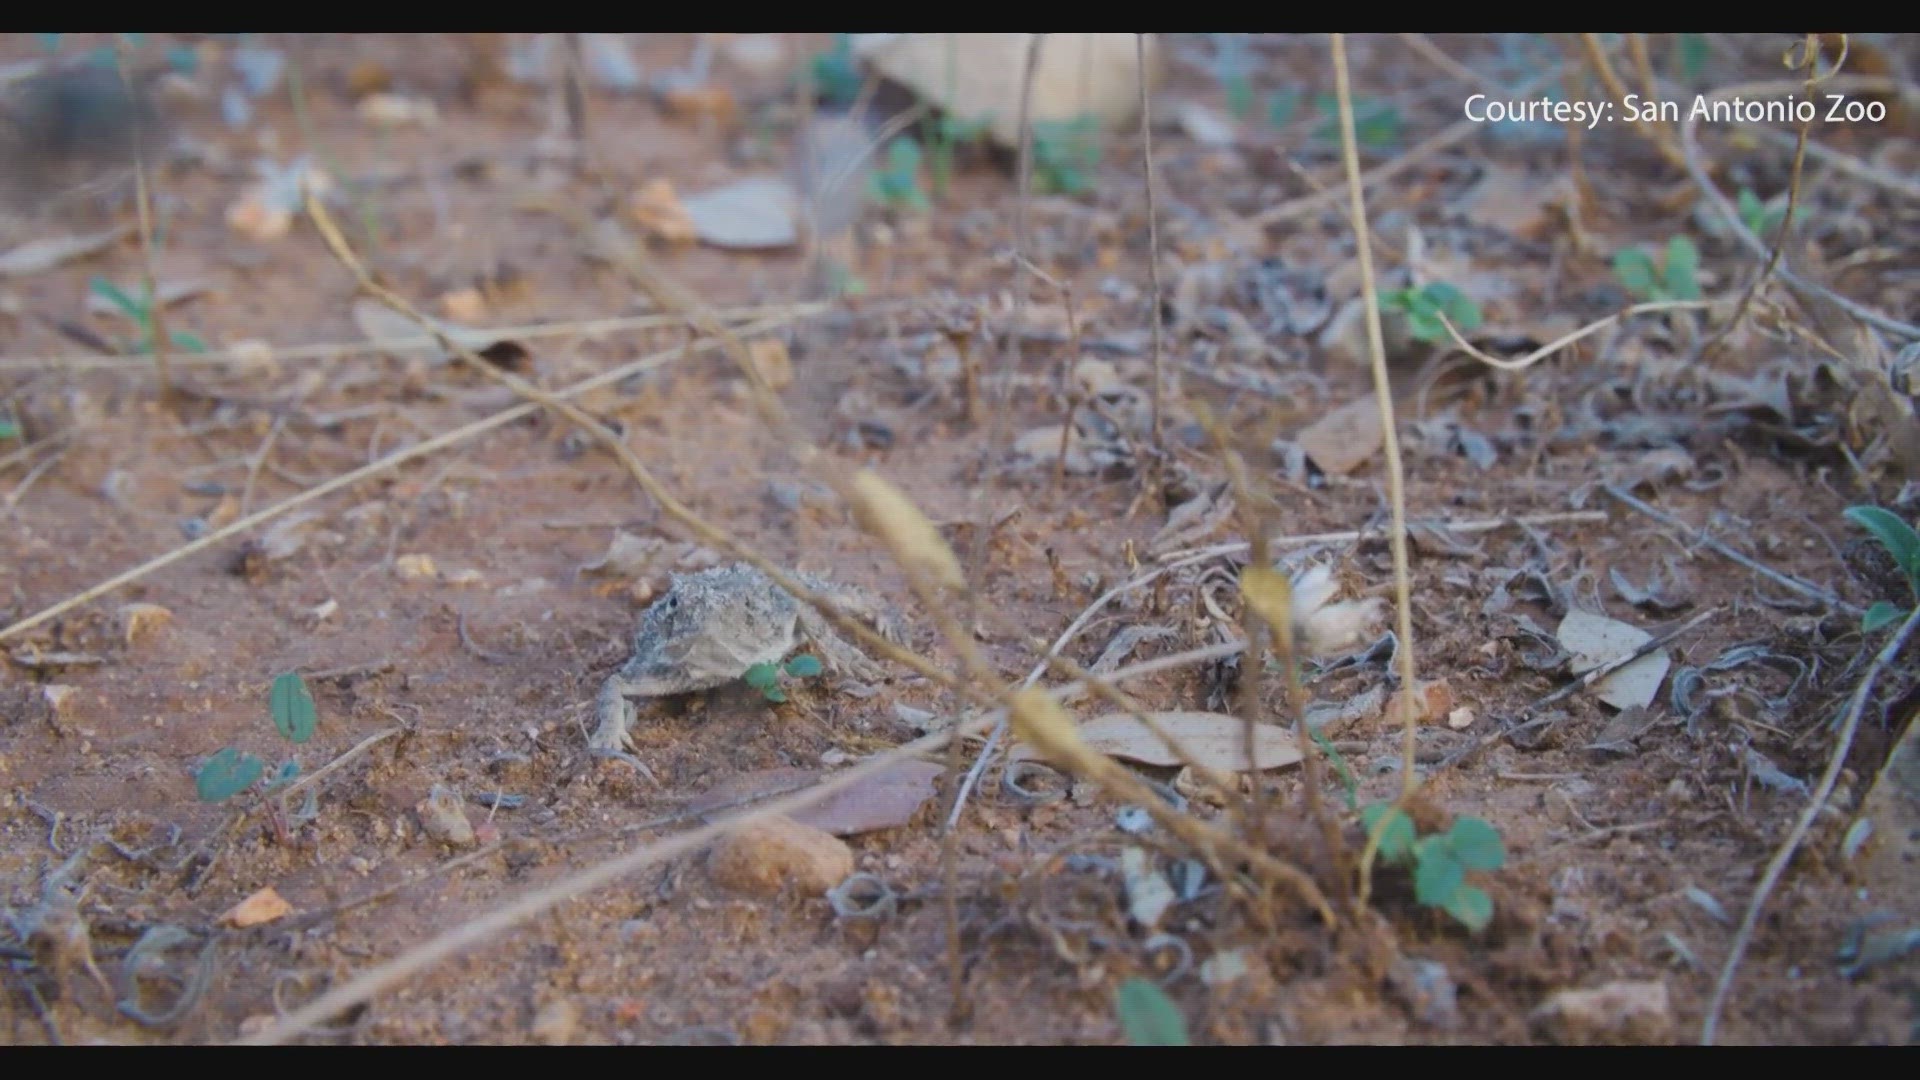 It's part of a reintroduction project where the lizards are monitored after release.